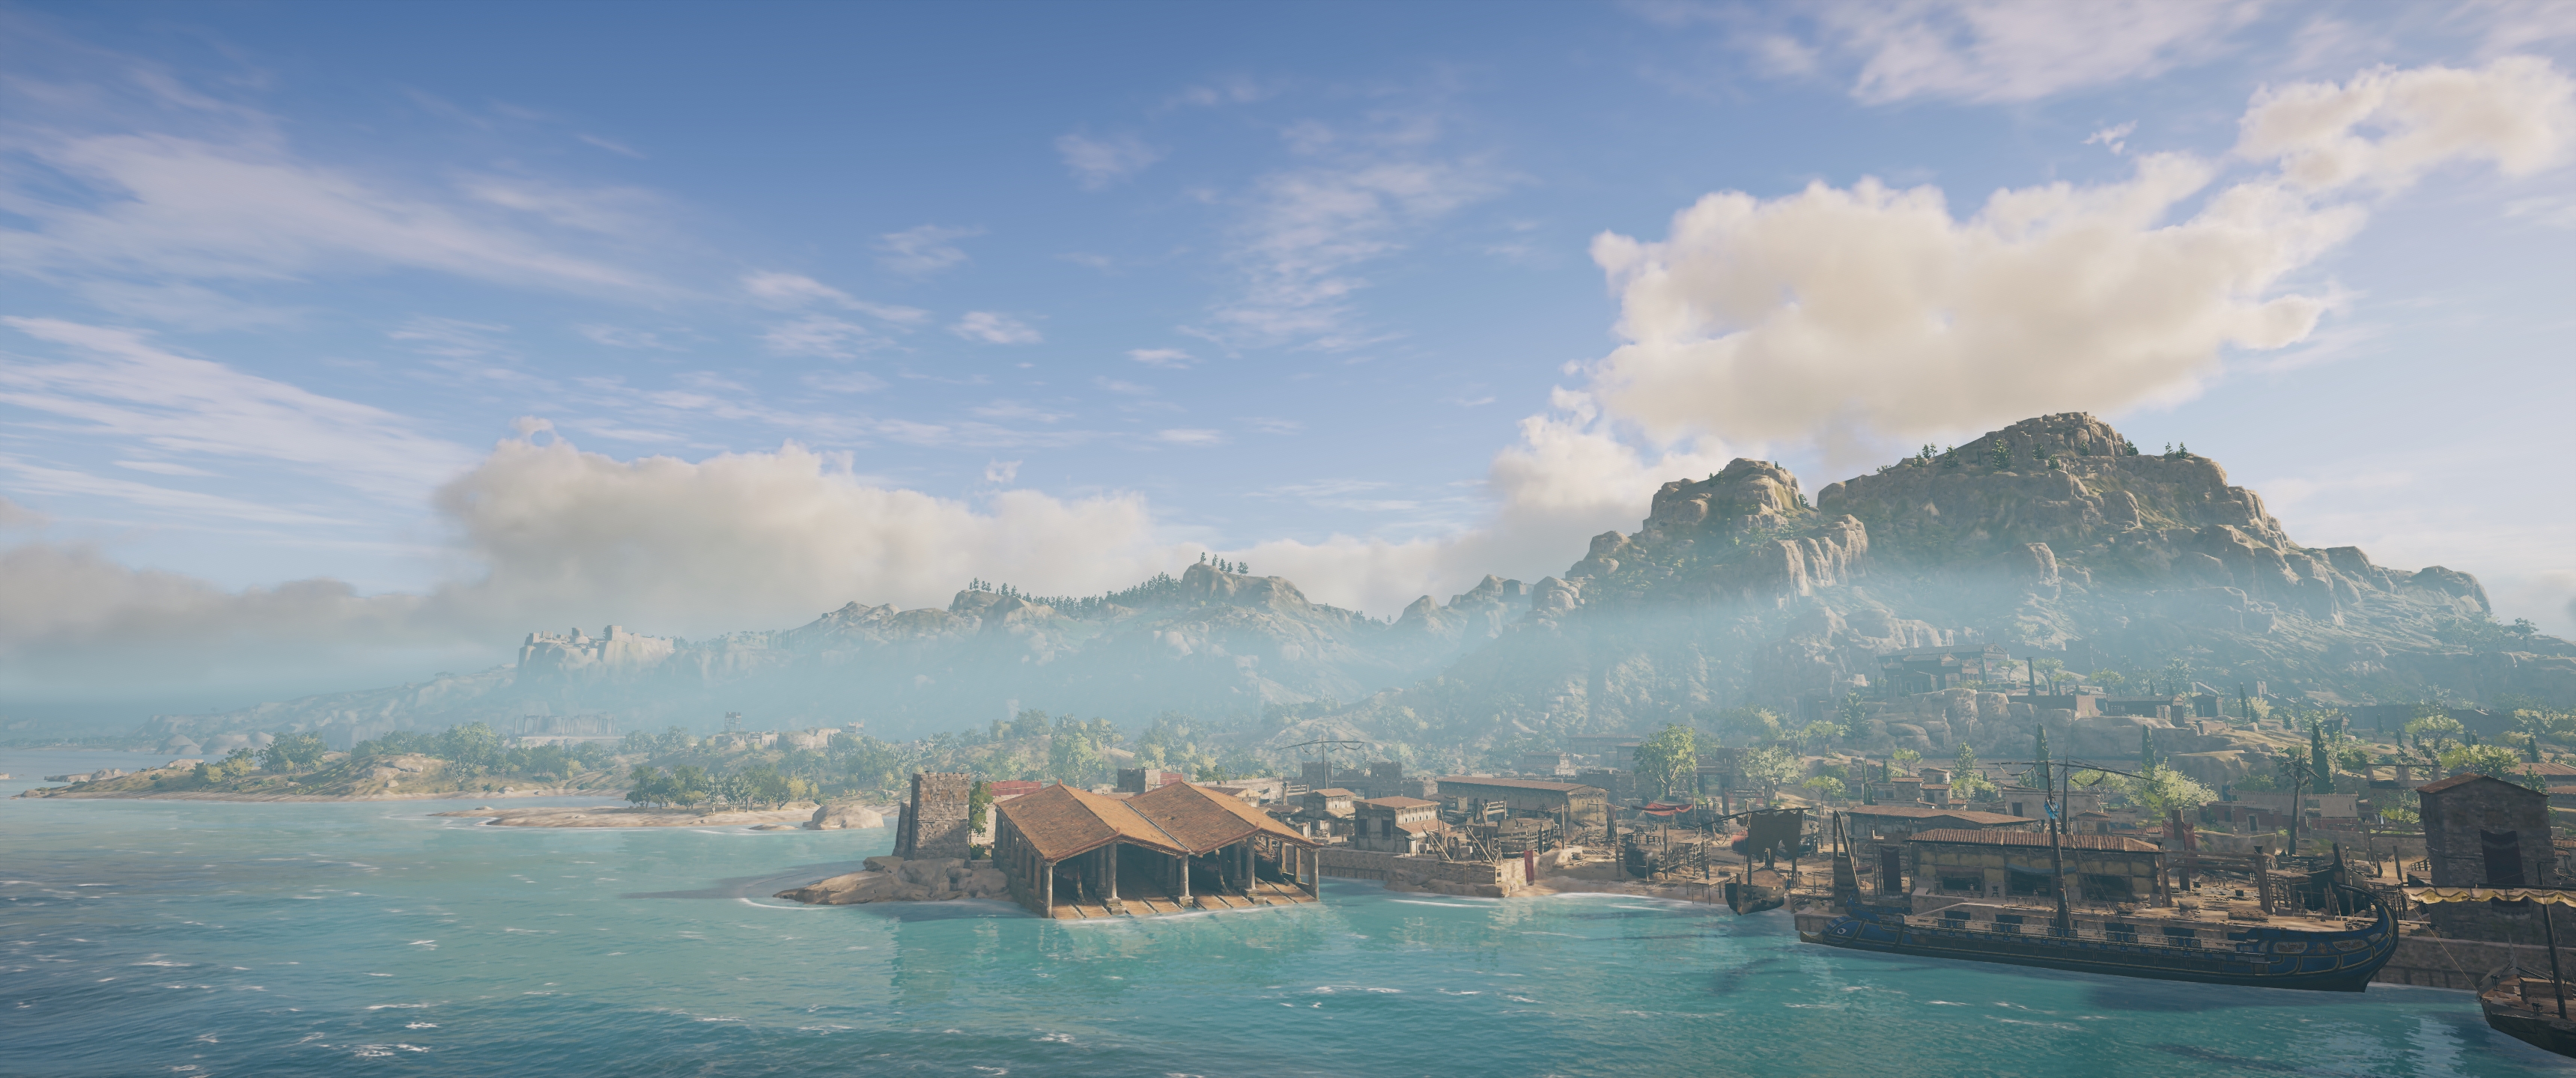 General 3440x1440 Assassins Creed: Odyssey Greece video games Assassin's Creed Ubisoft video game art screen shot village sky water clouds boat CGI sunlight trees